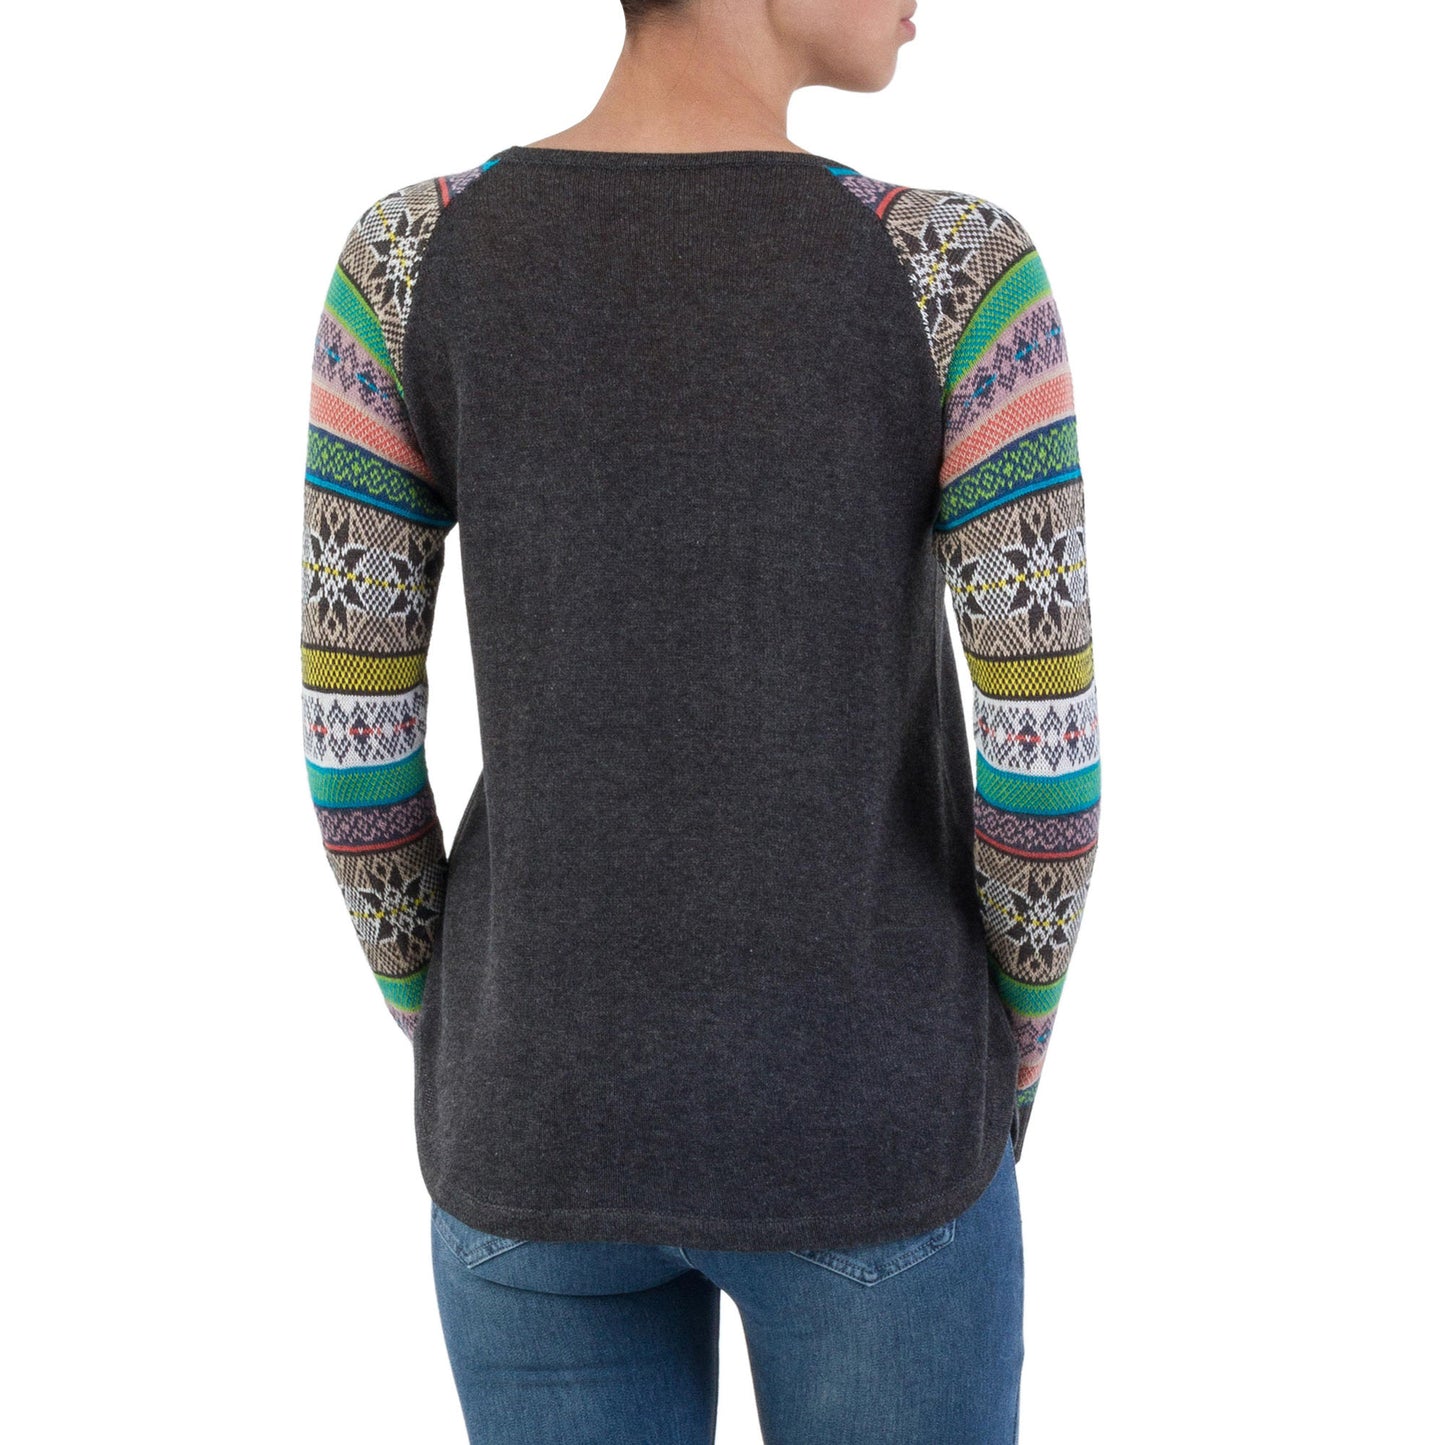 Andean Star in Charcoal Knit Sweater